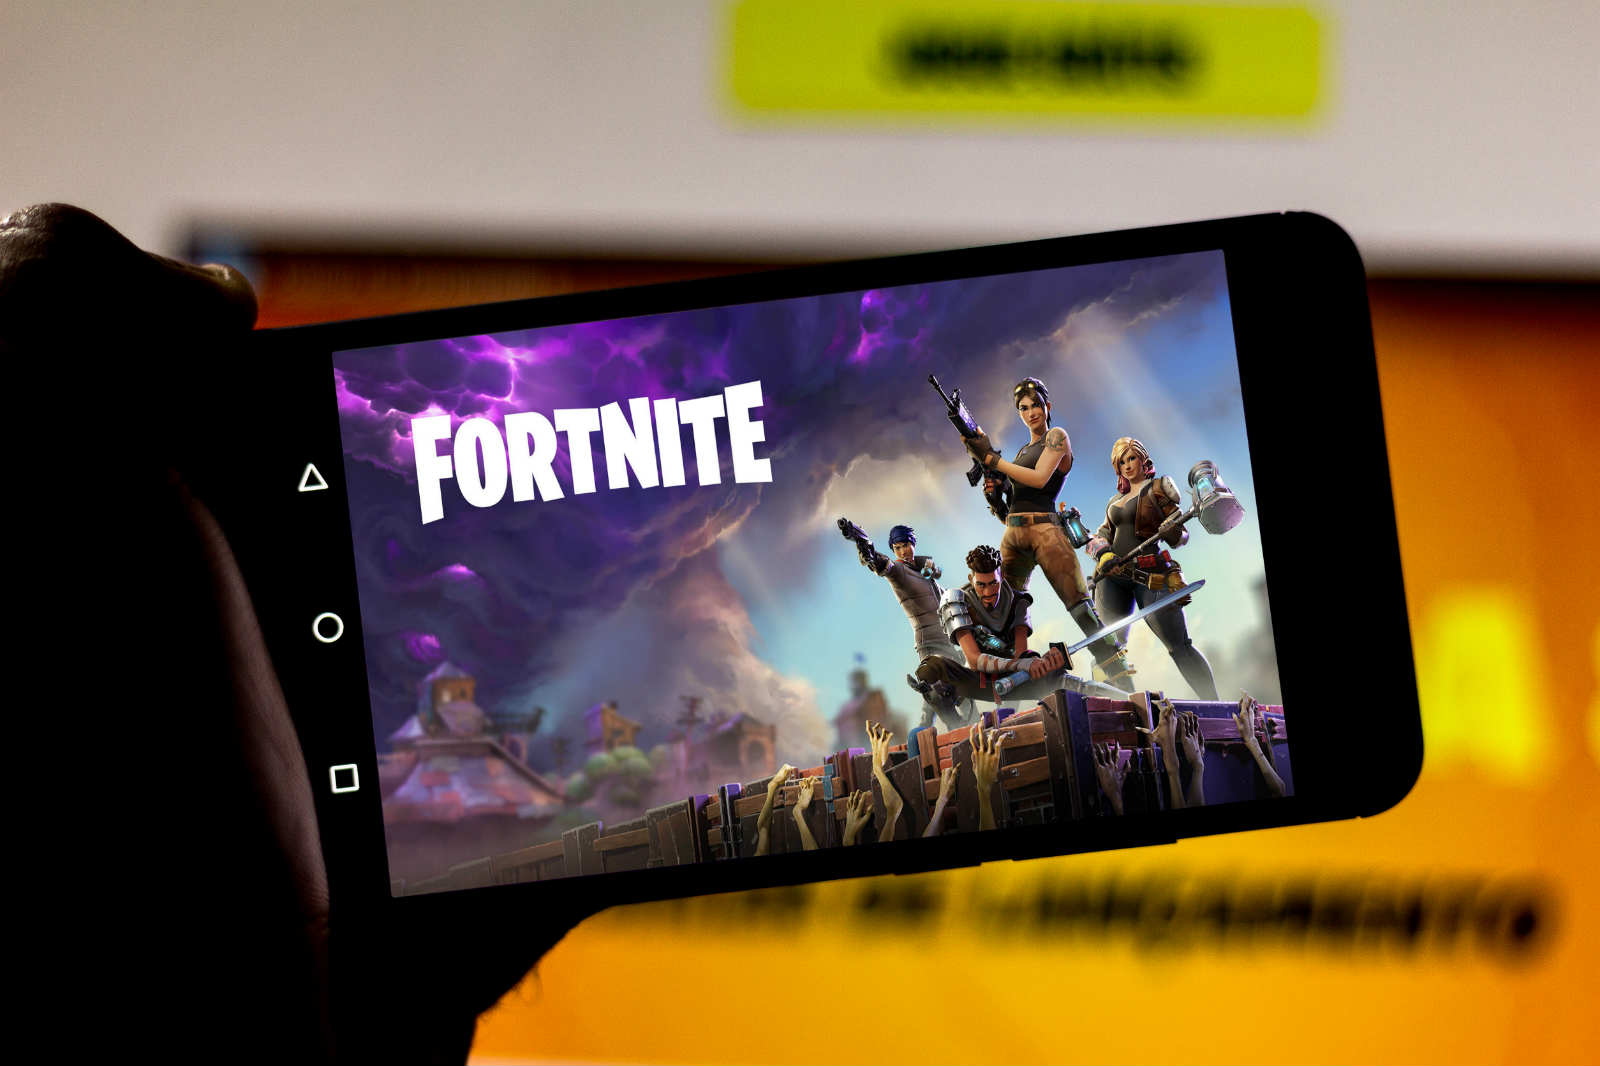 Download Fortnite On Samsung Galaxy How To Get Fortnite On Samsung Download Install Guide Esr Blog